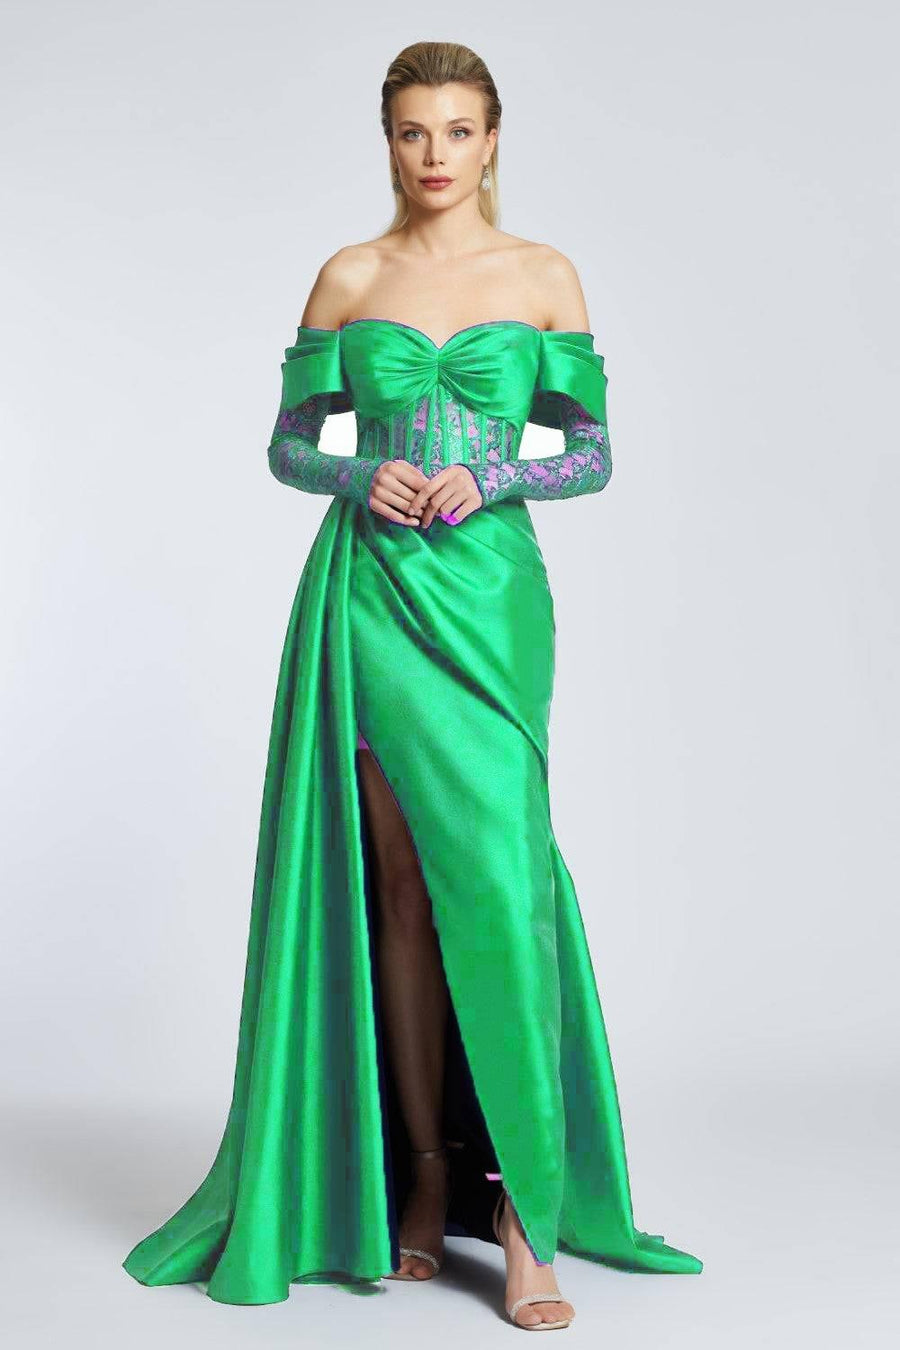 Draped Embroidered Long Evening Dress